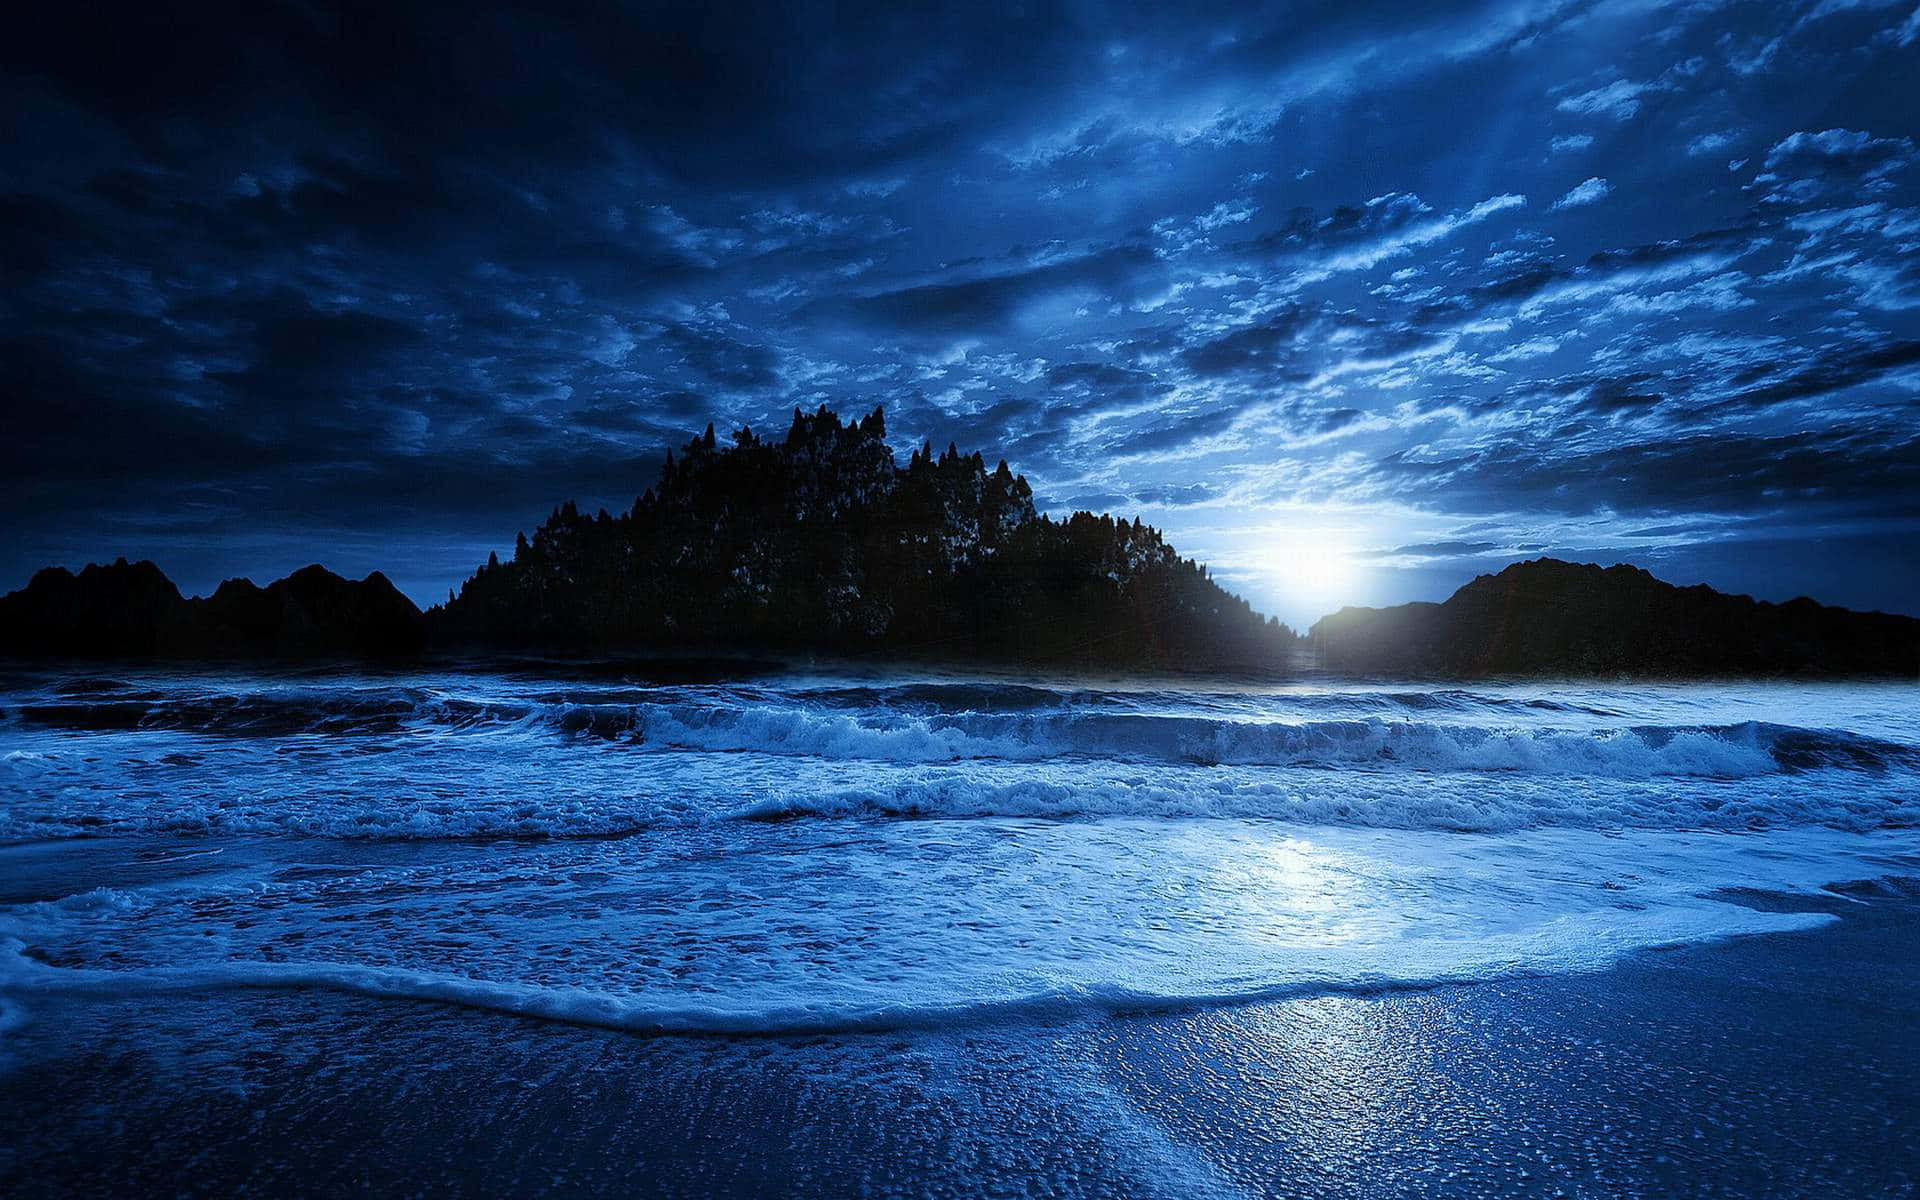 Enjoy the beauty of a beach at night.